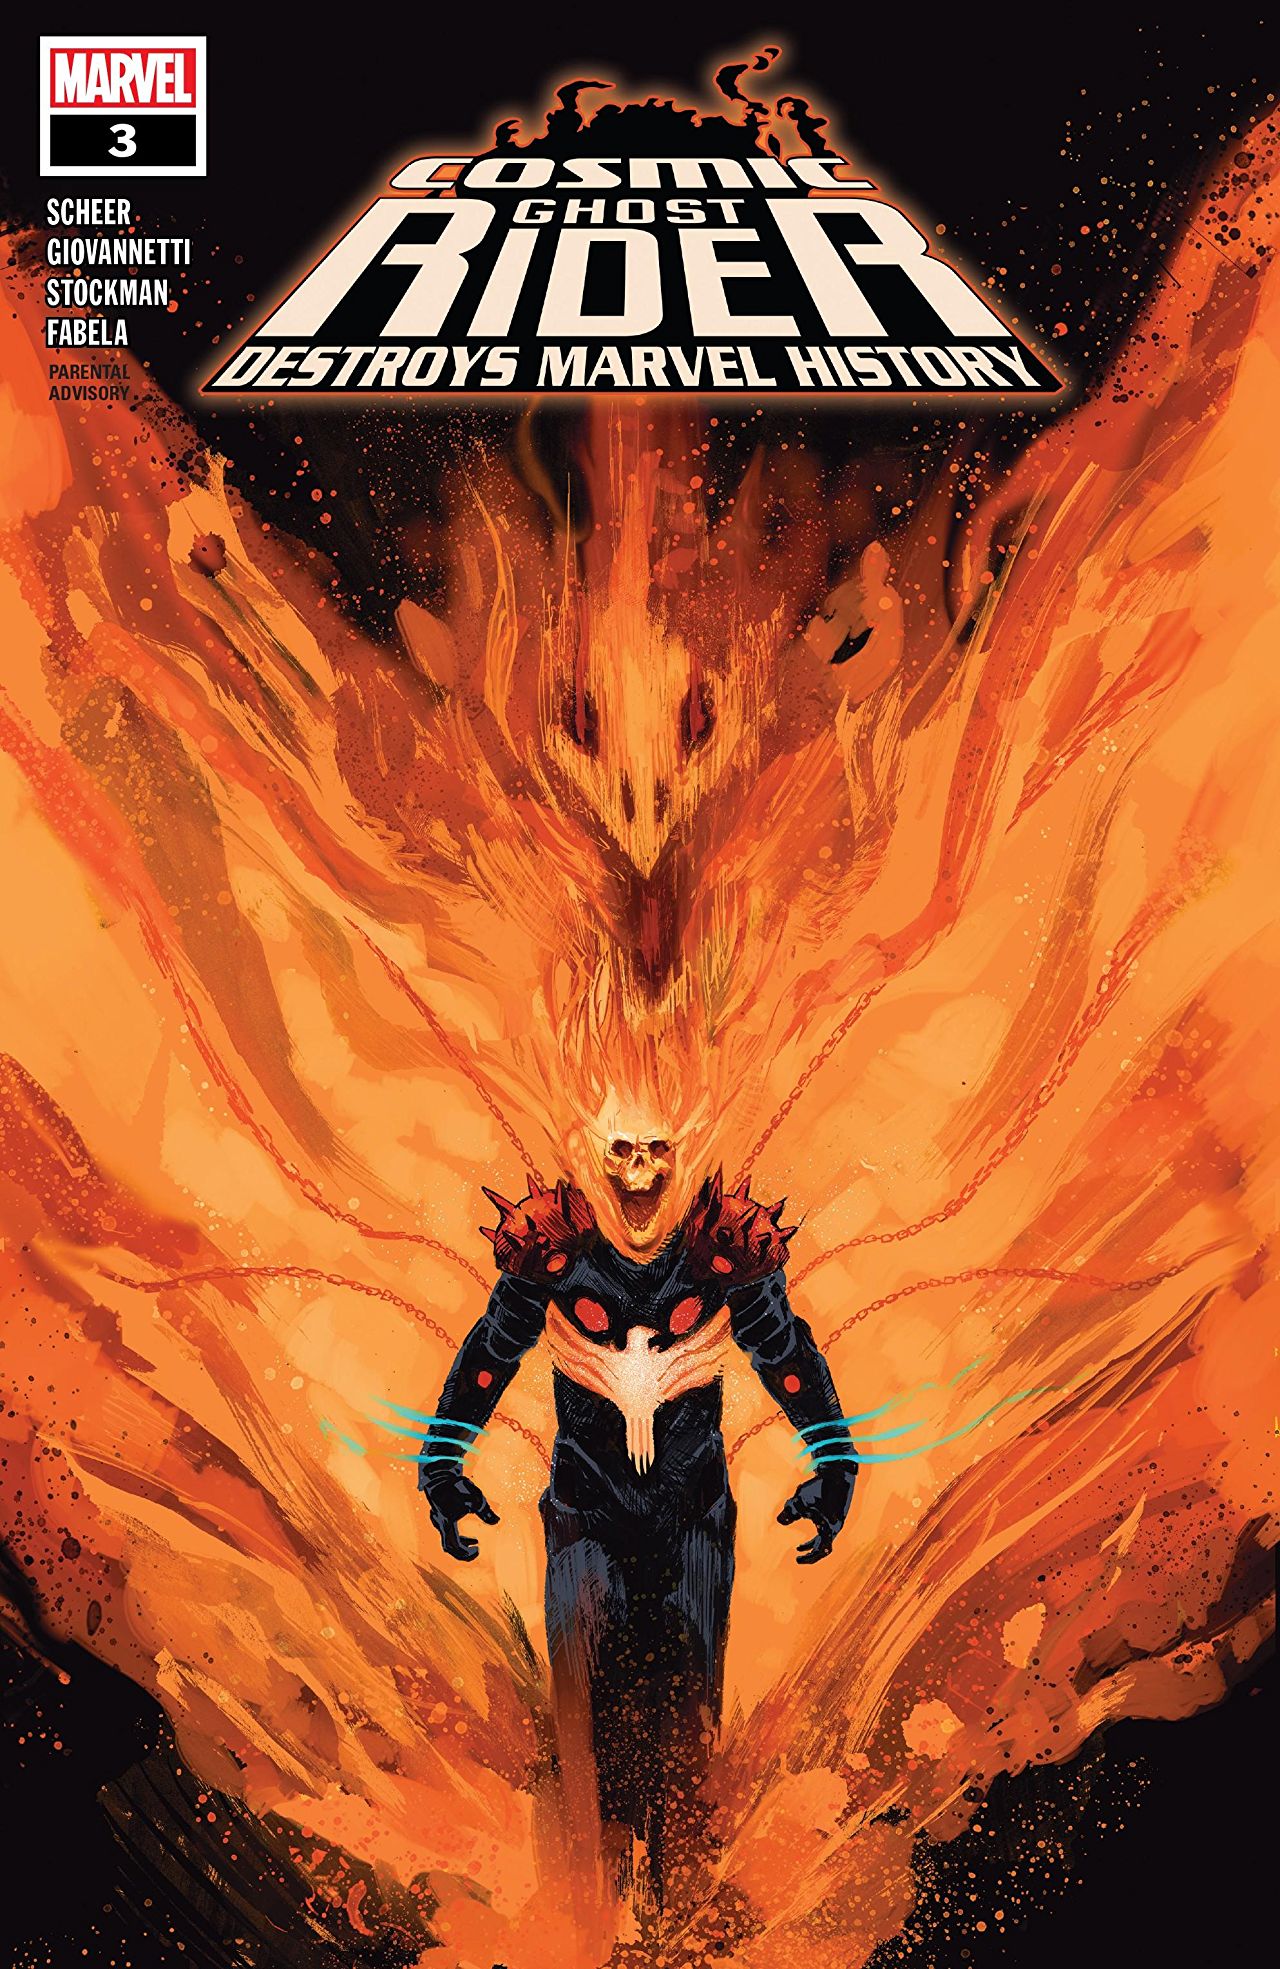 Marvel Preview: Cosmic Ghost Rider Destroys Marvel History #3